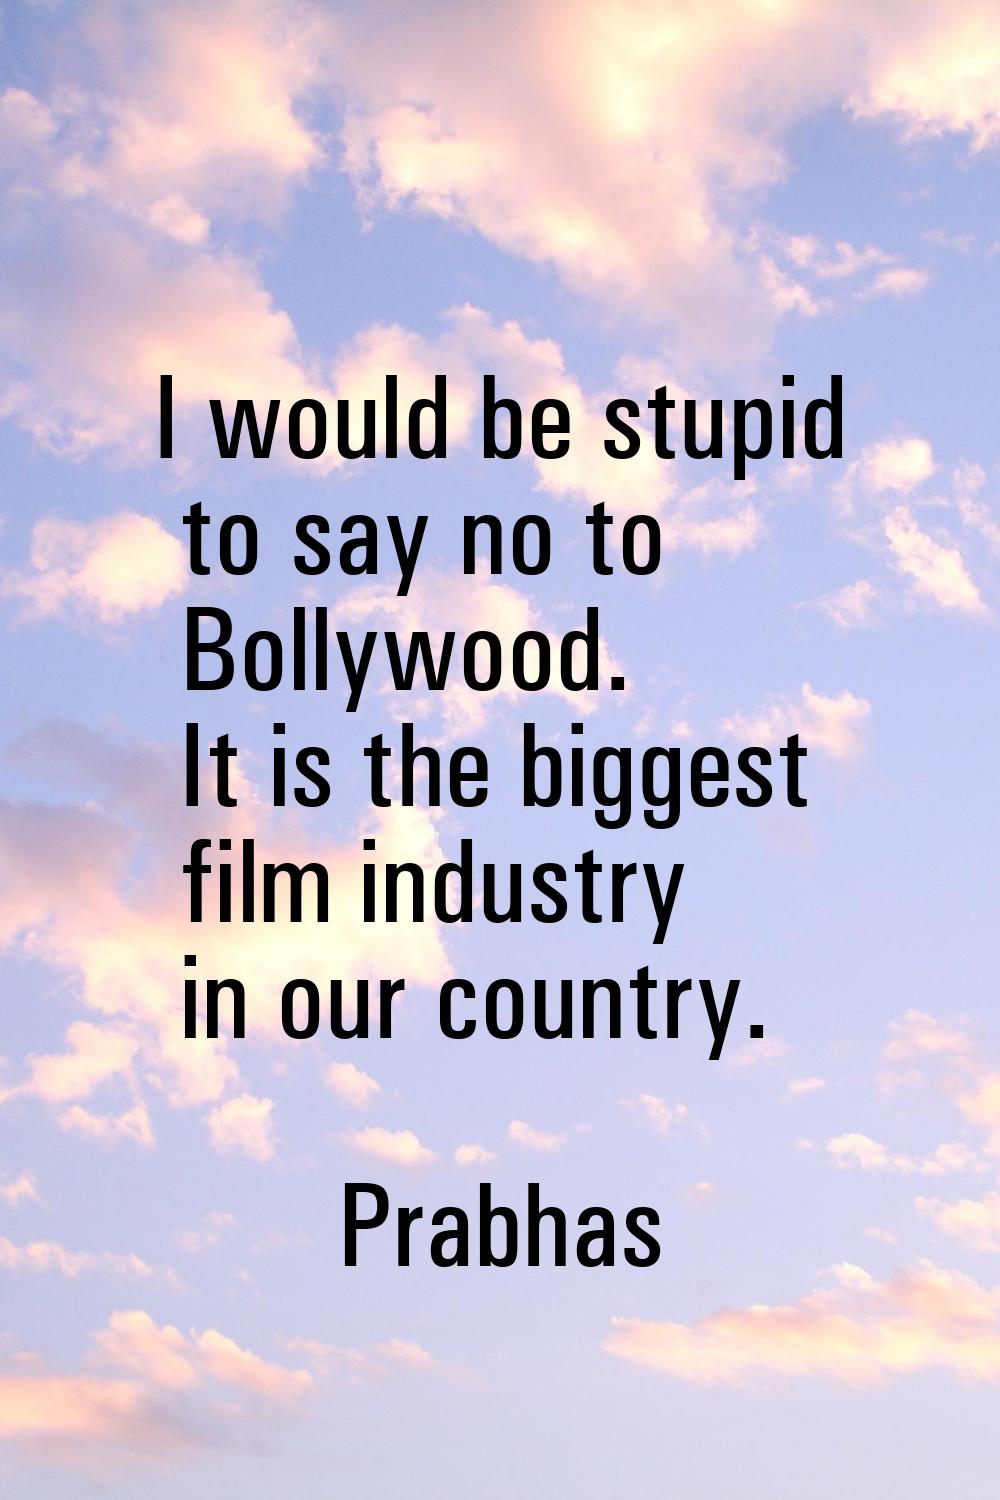 I would be stupid to say no to Bollywood. It is the biggest film industry in our country.